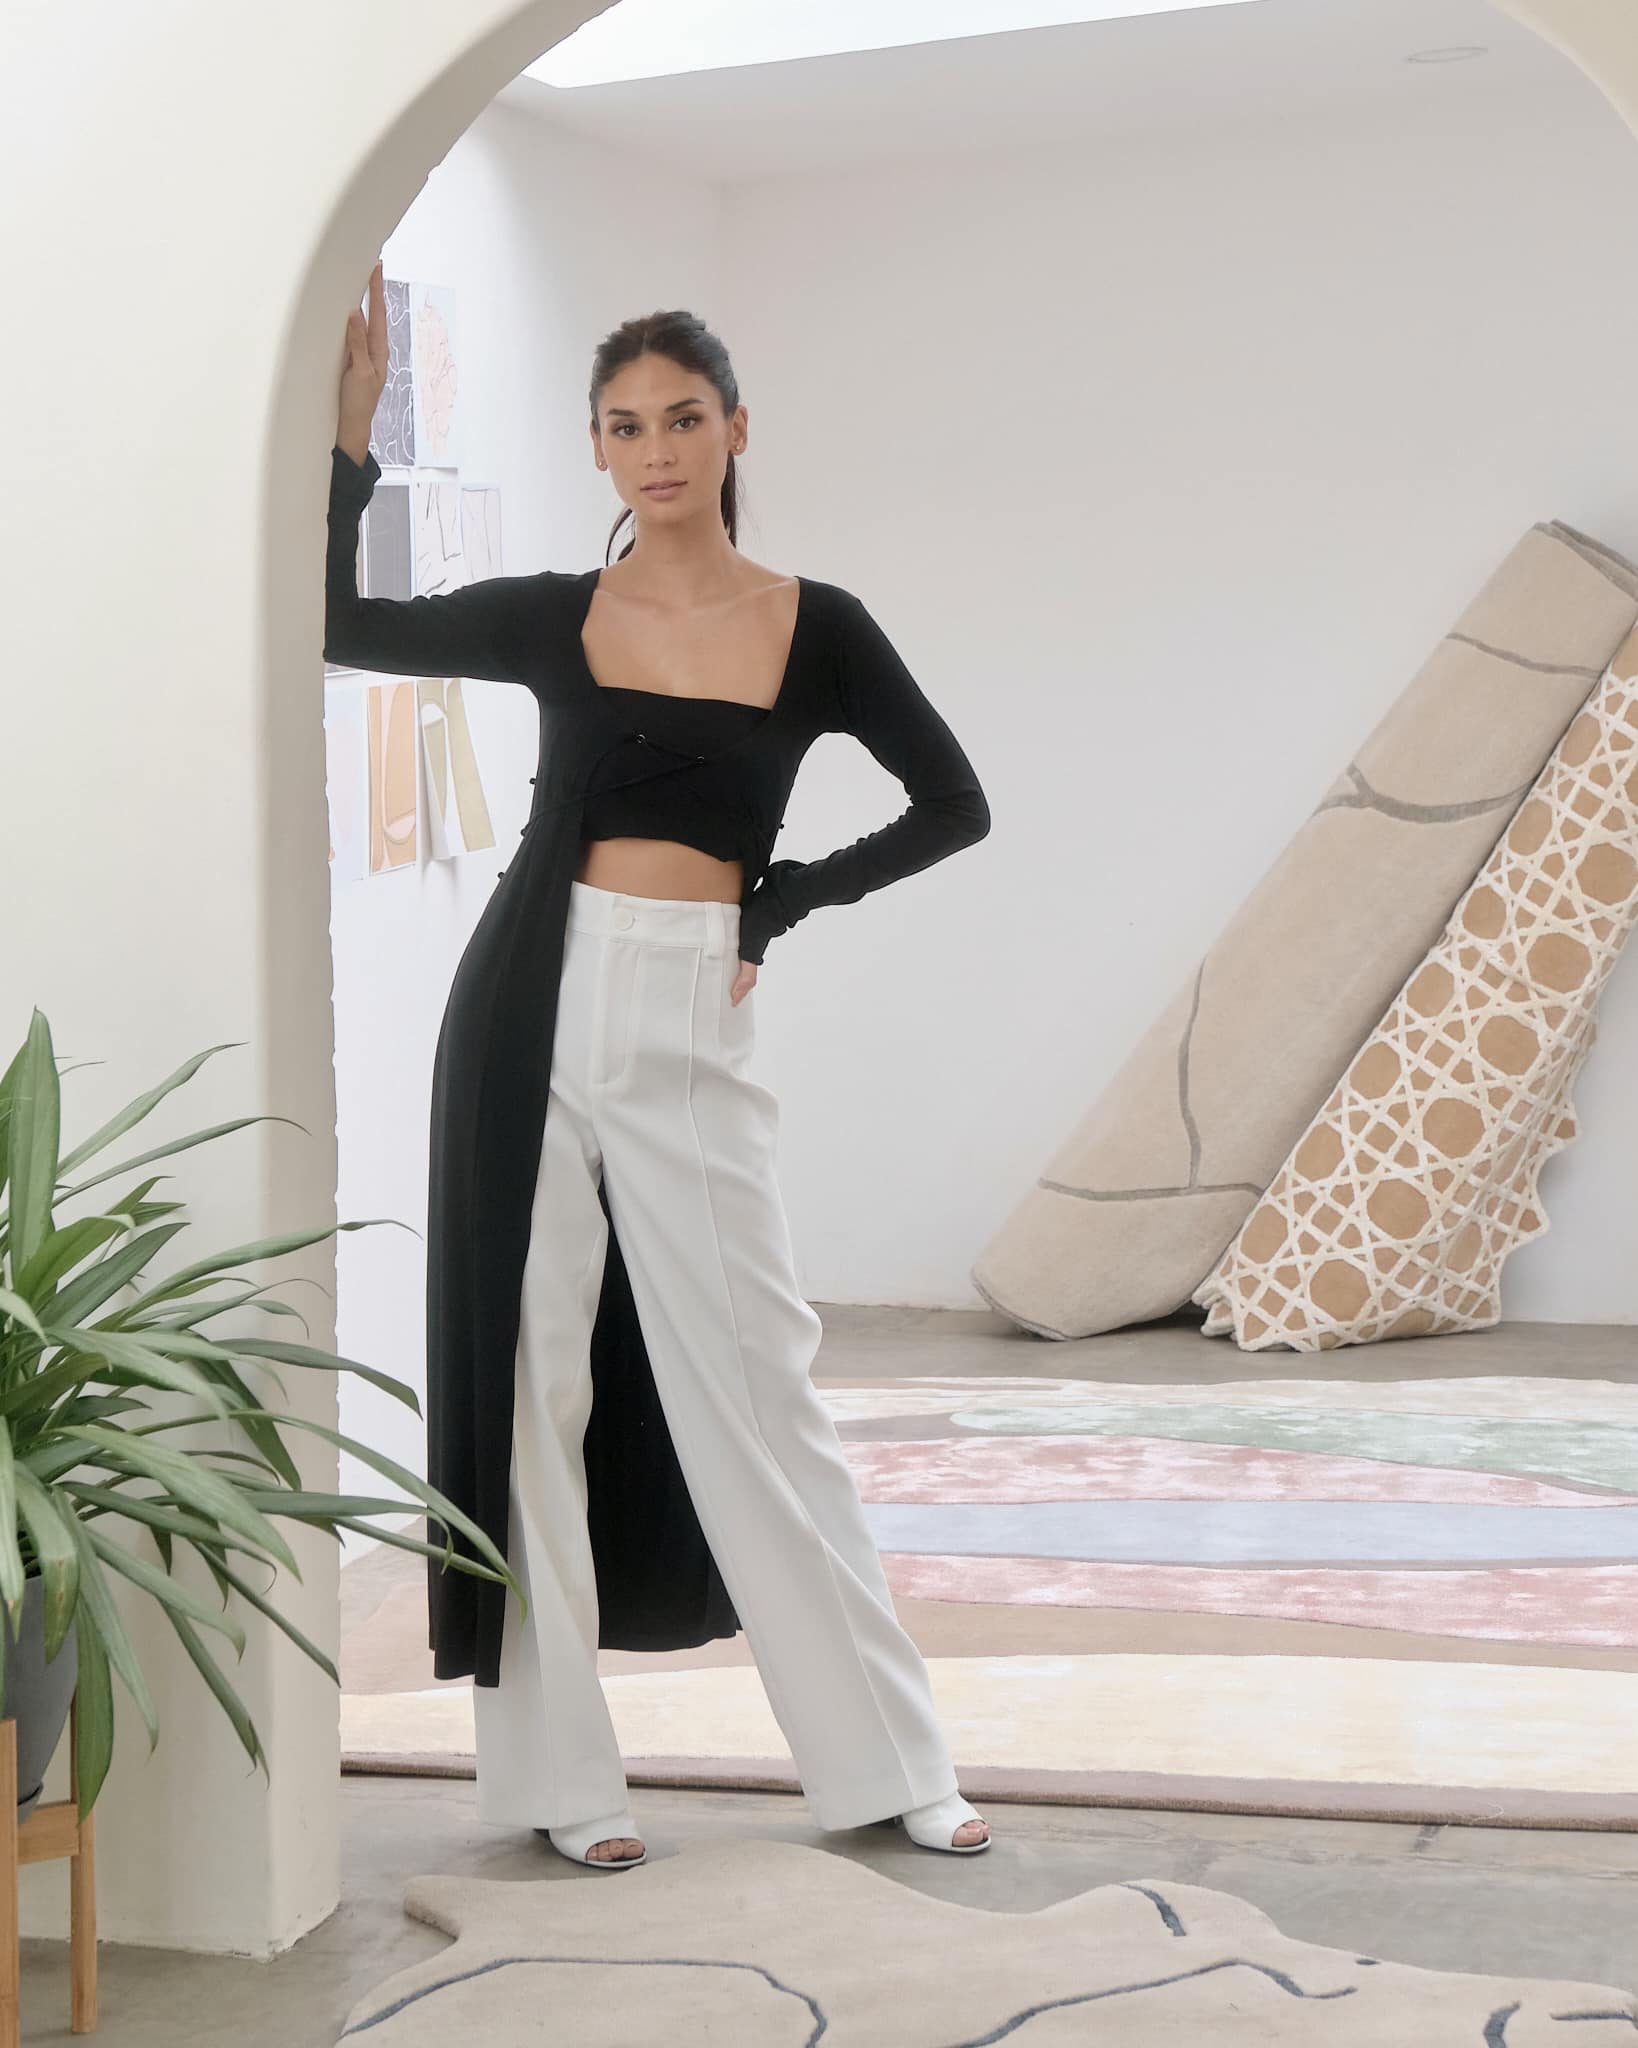 Pia Wurtzbach Ventures Into Business By Launching Her Line Of Carpets & Rugs